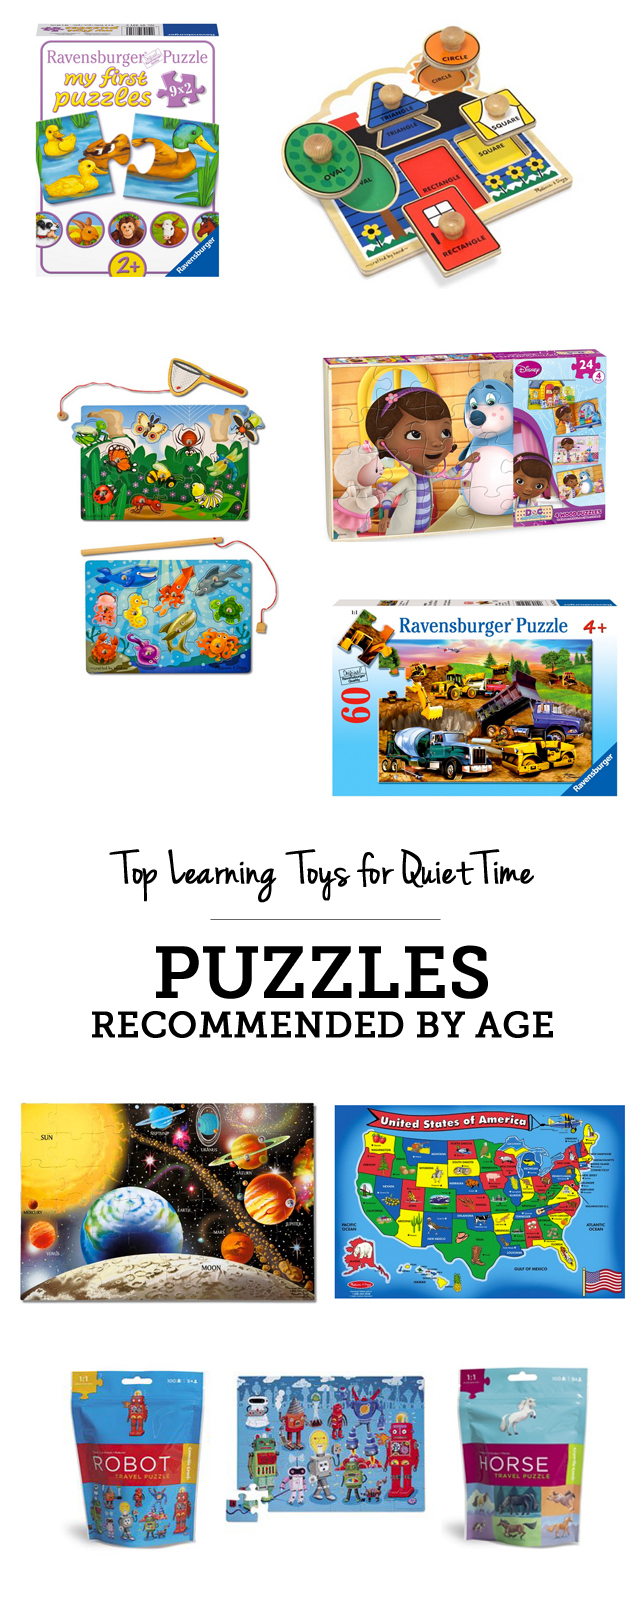 Top learning toys for quiet time: puzzles recommended by age - love this entire gift guide!